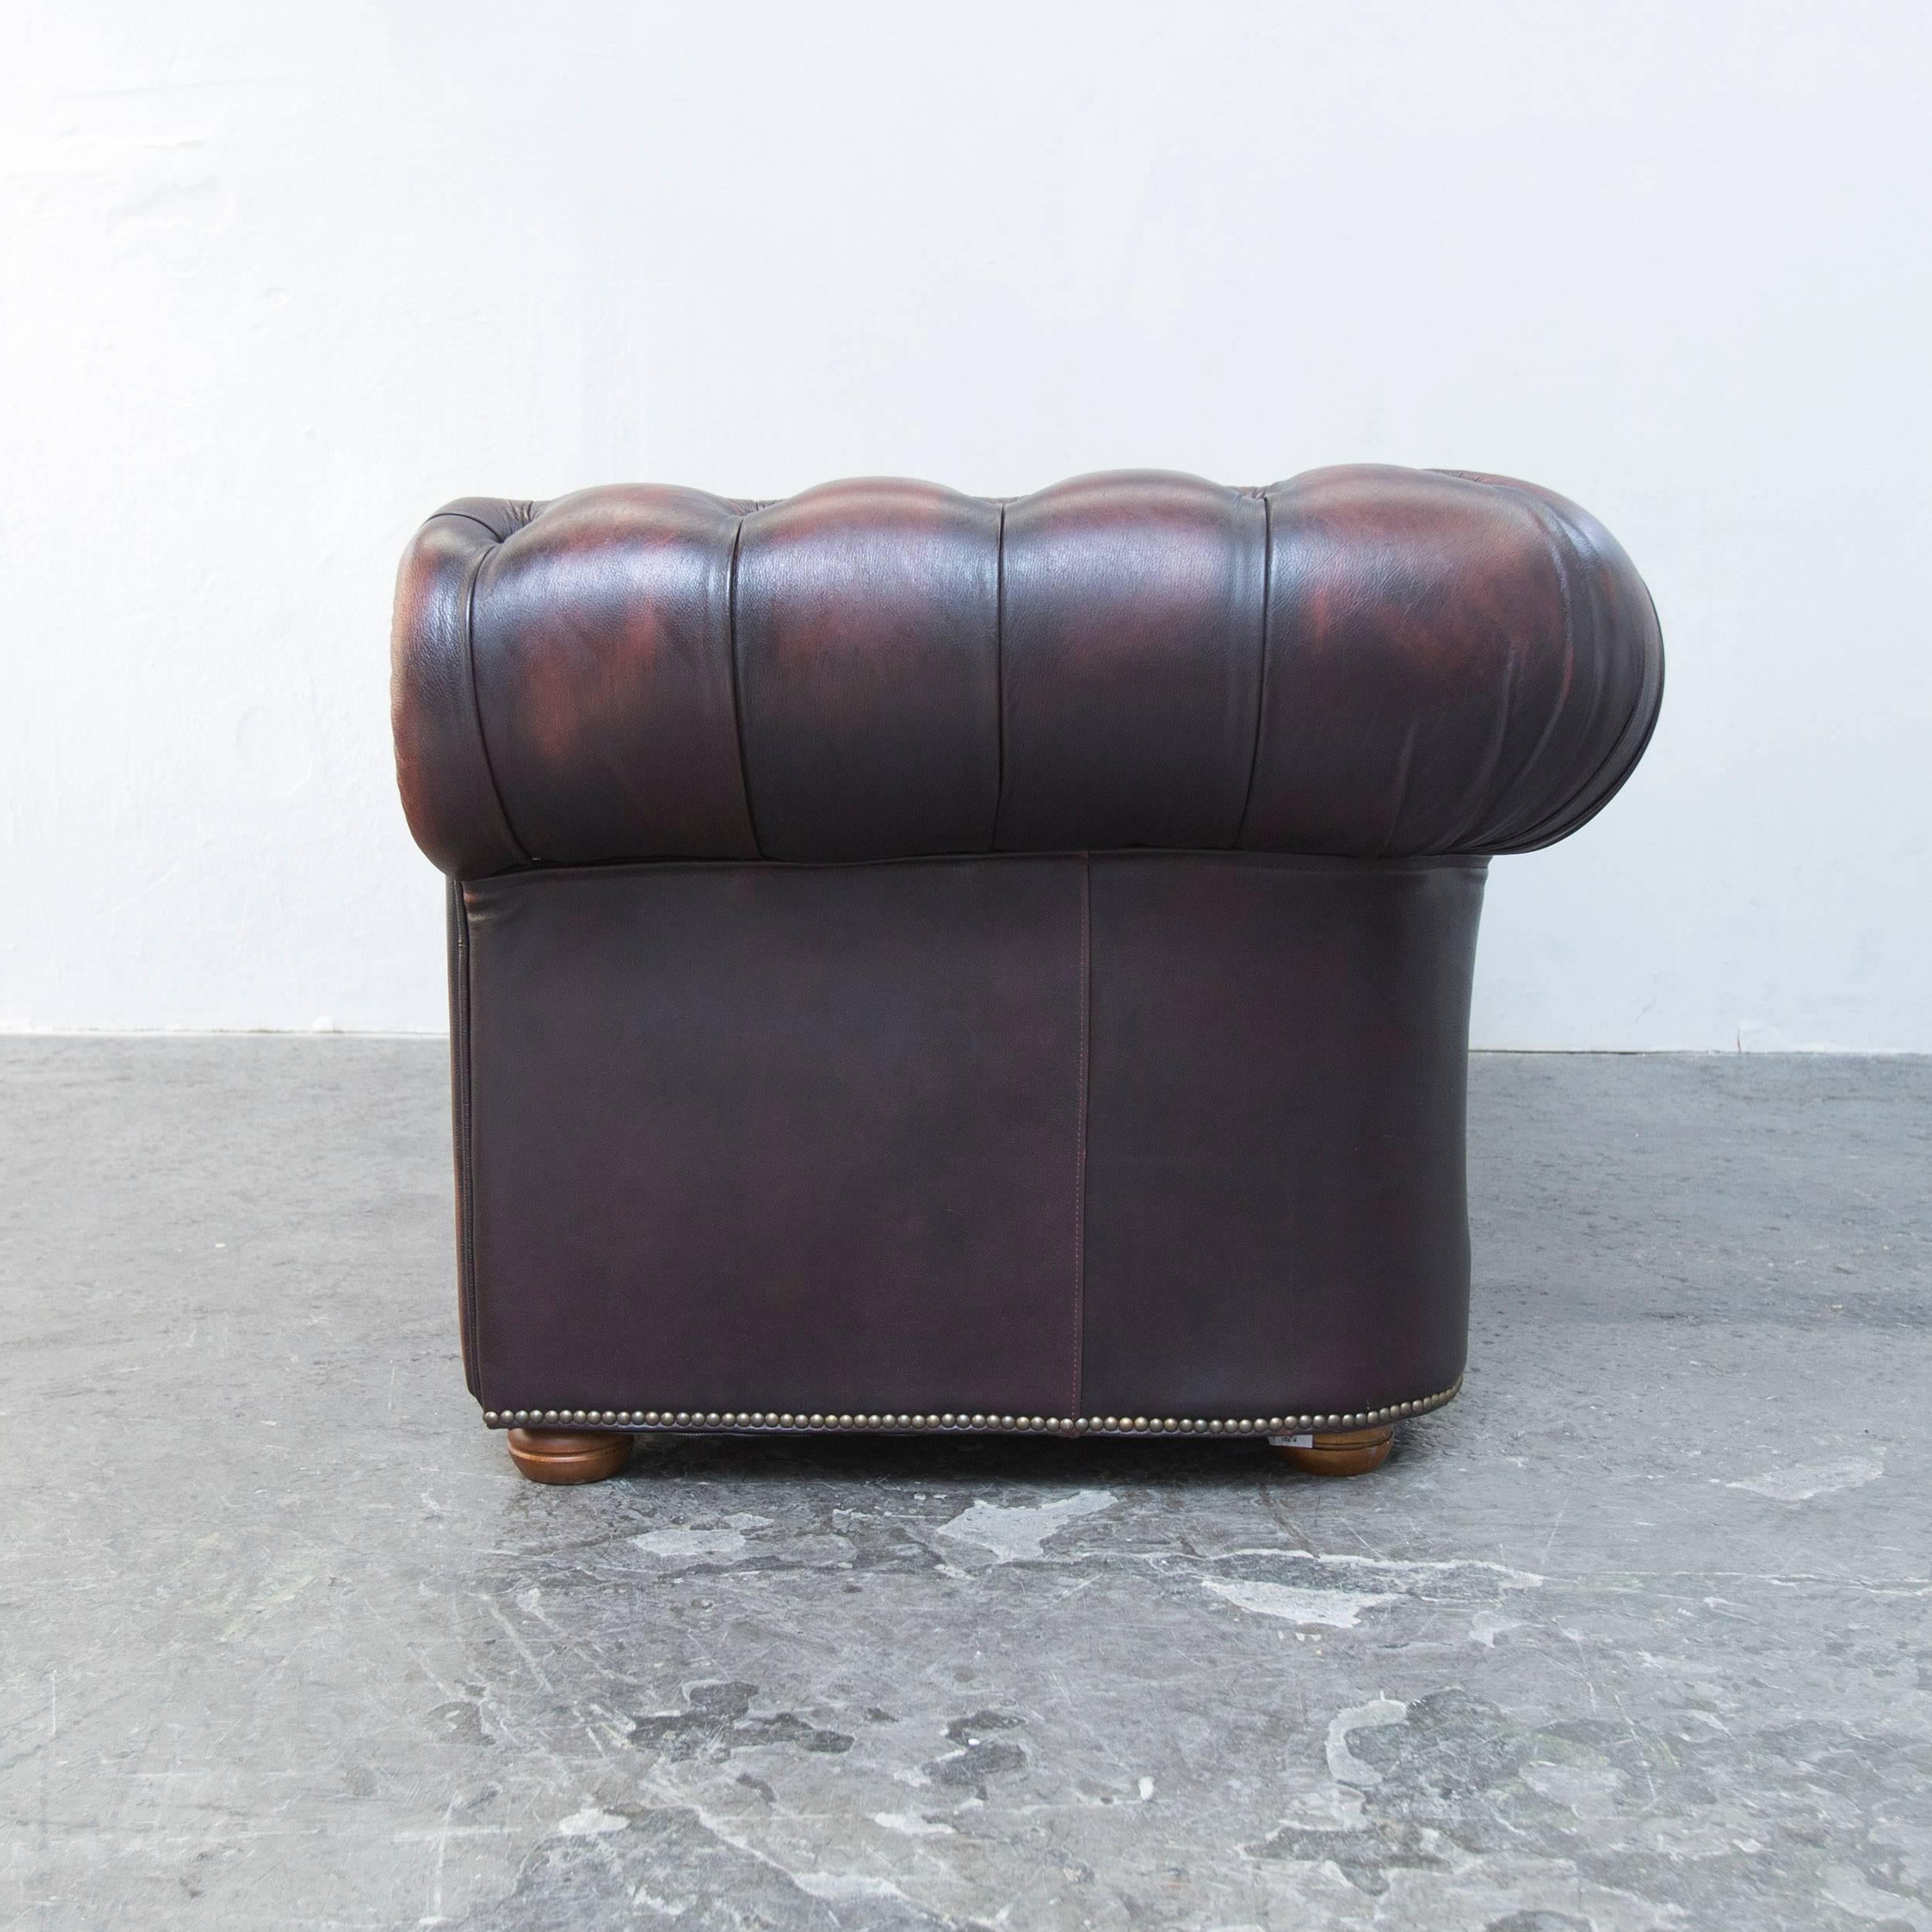 Original Chesterfield Leather Sofa Brown Three-Seat Couch Vintage Retro 3